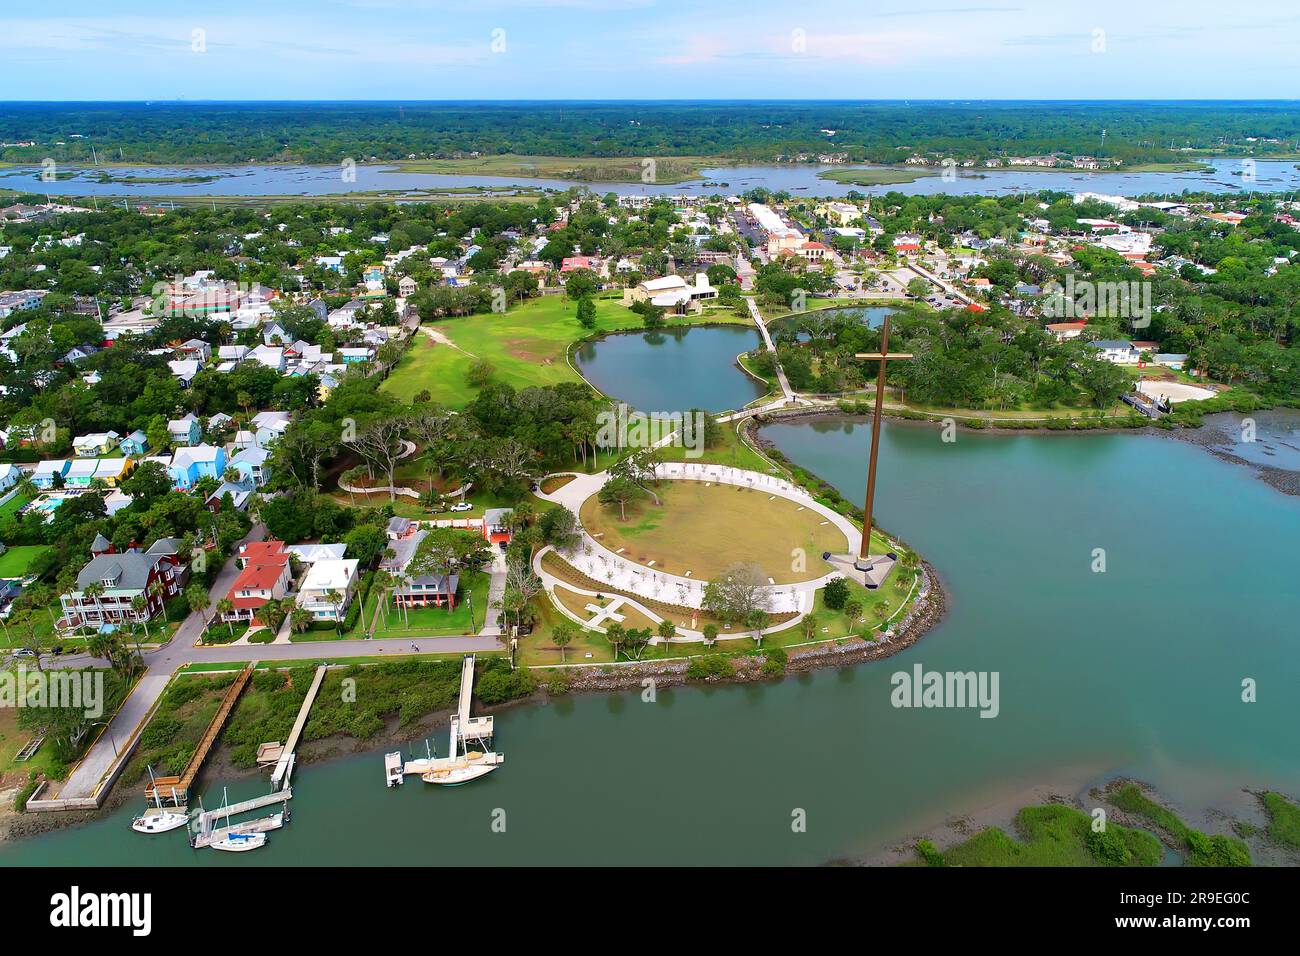 Nombre de dios Mission Name of God Mission in St. Augustine Florida USA Stockfoto